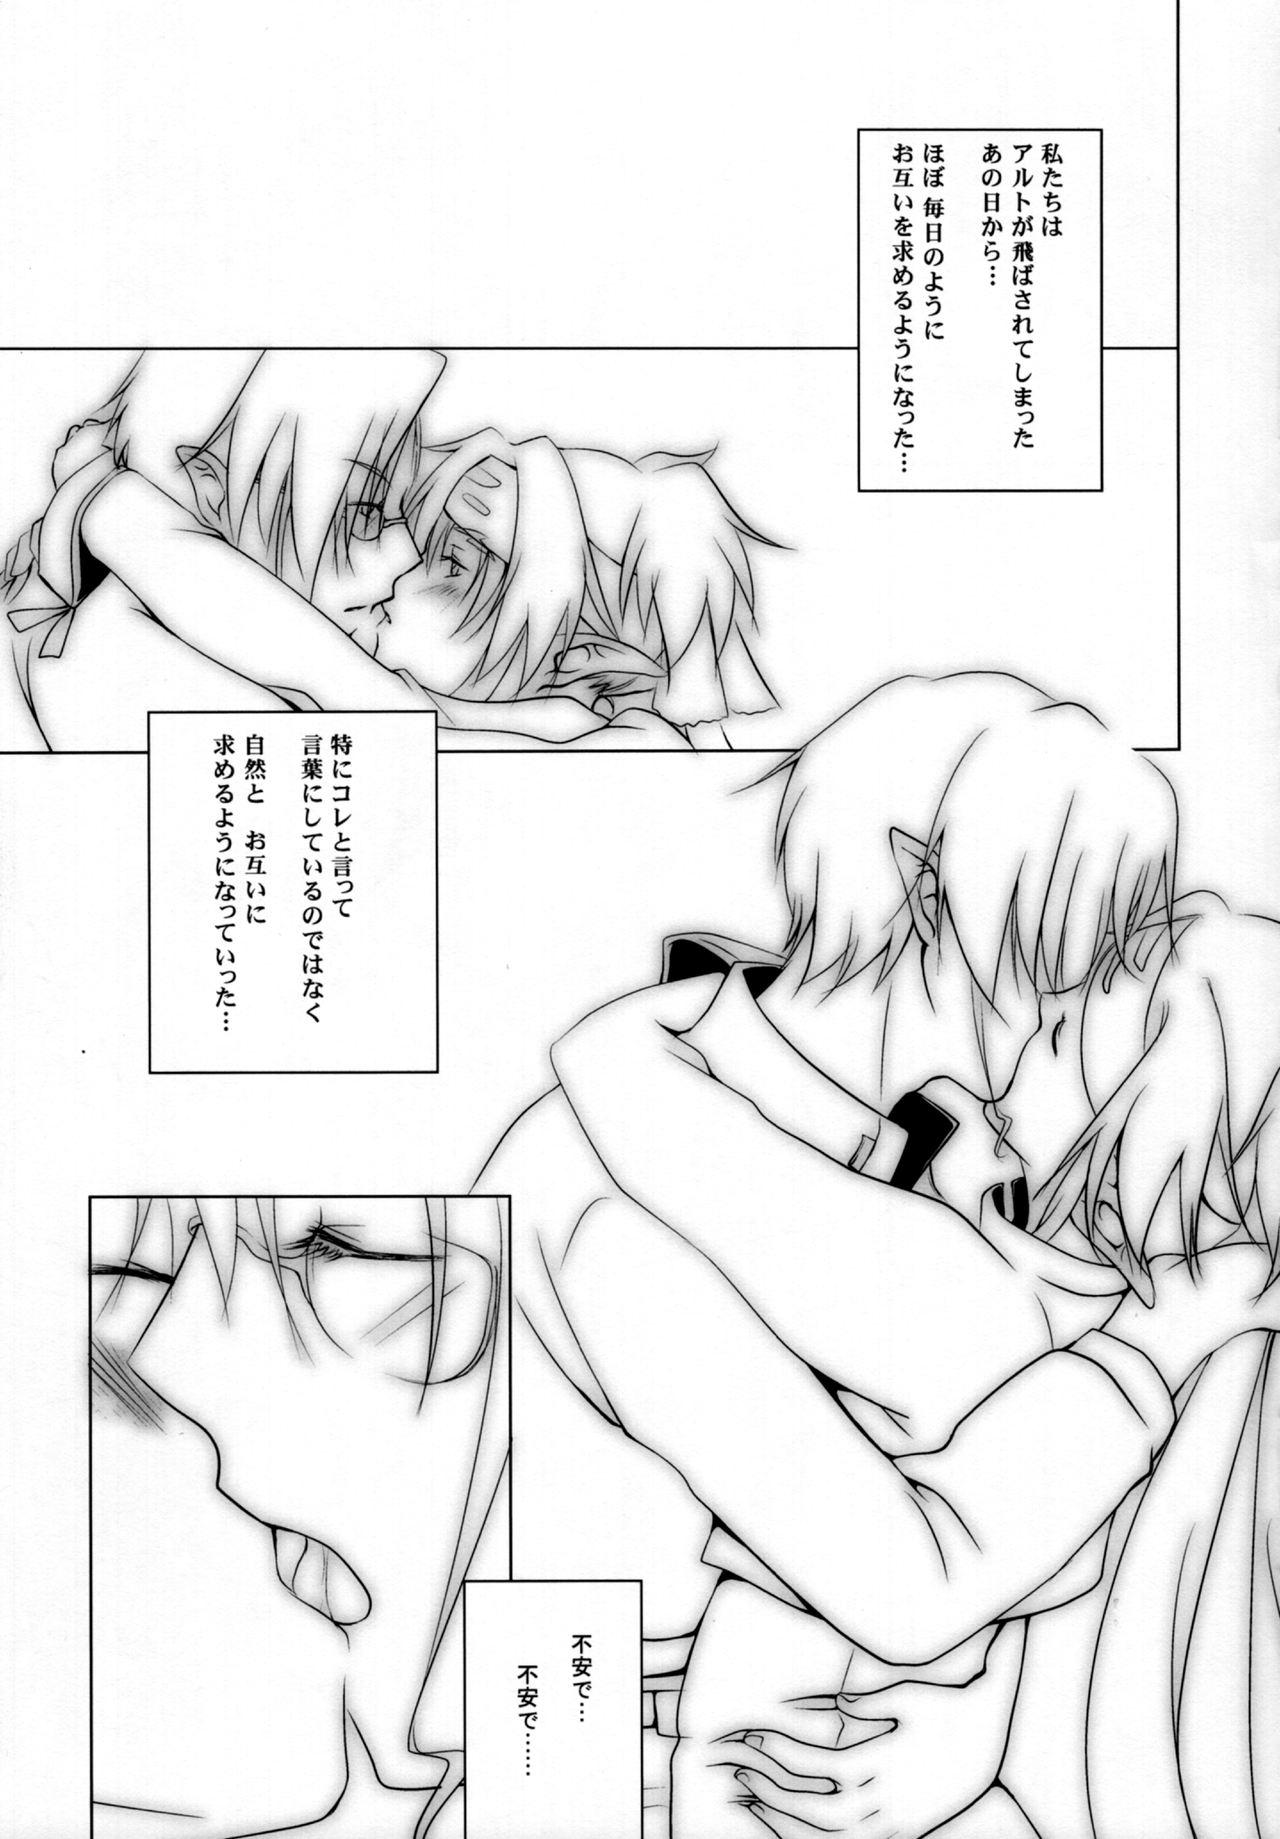 Masturbates Ever moment with you - Macross frontier Flagra - Page 2